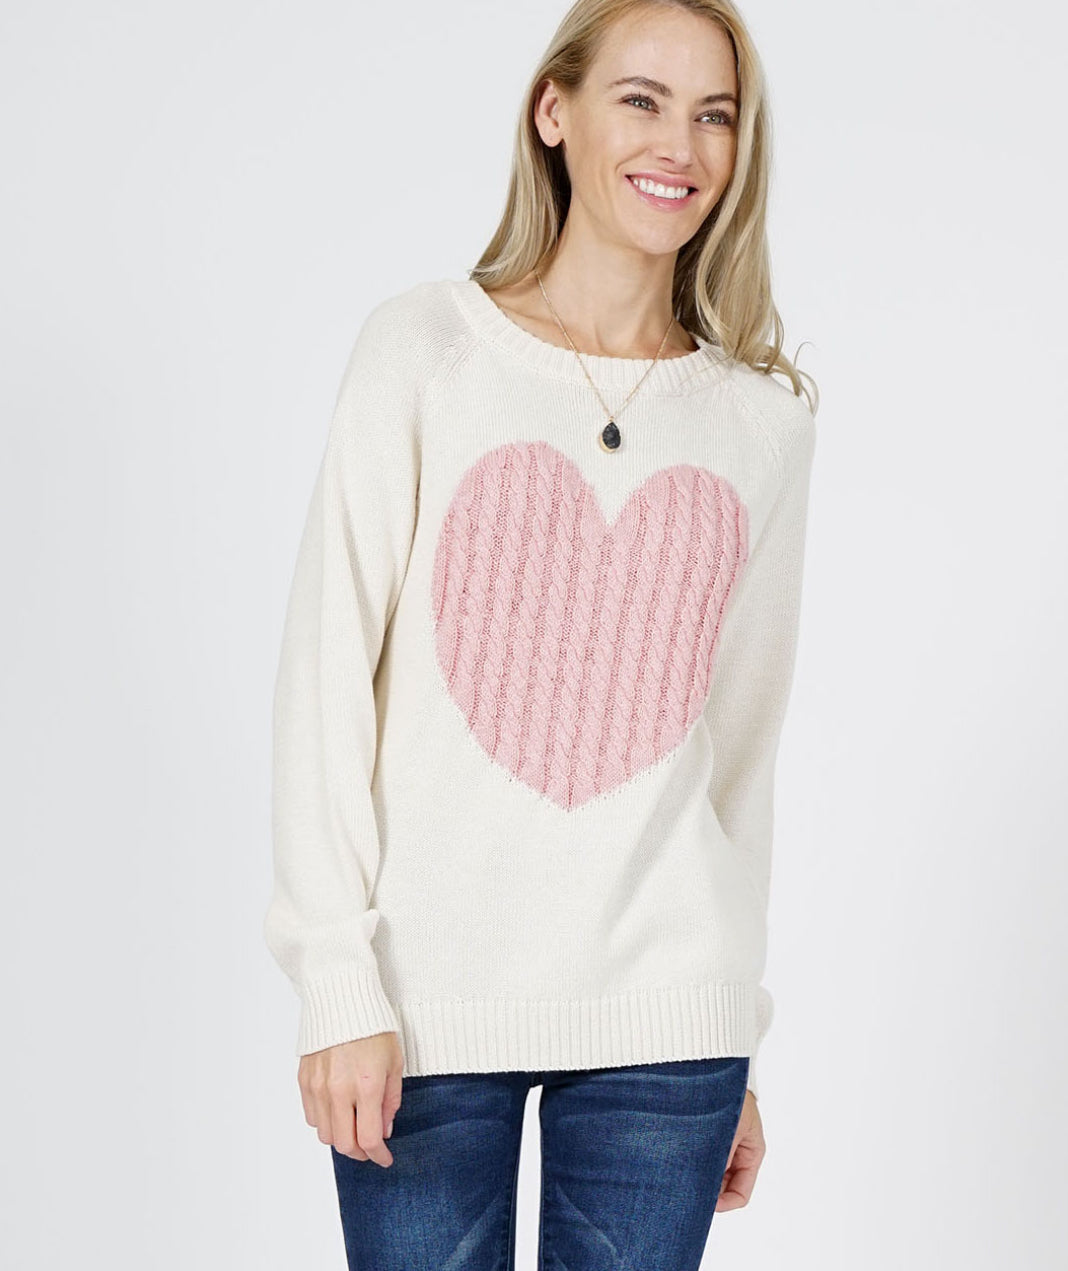 VALENTINE HEART CABLE KNIT SWEATER